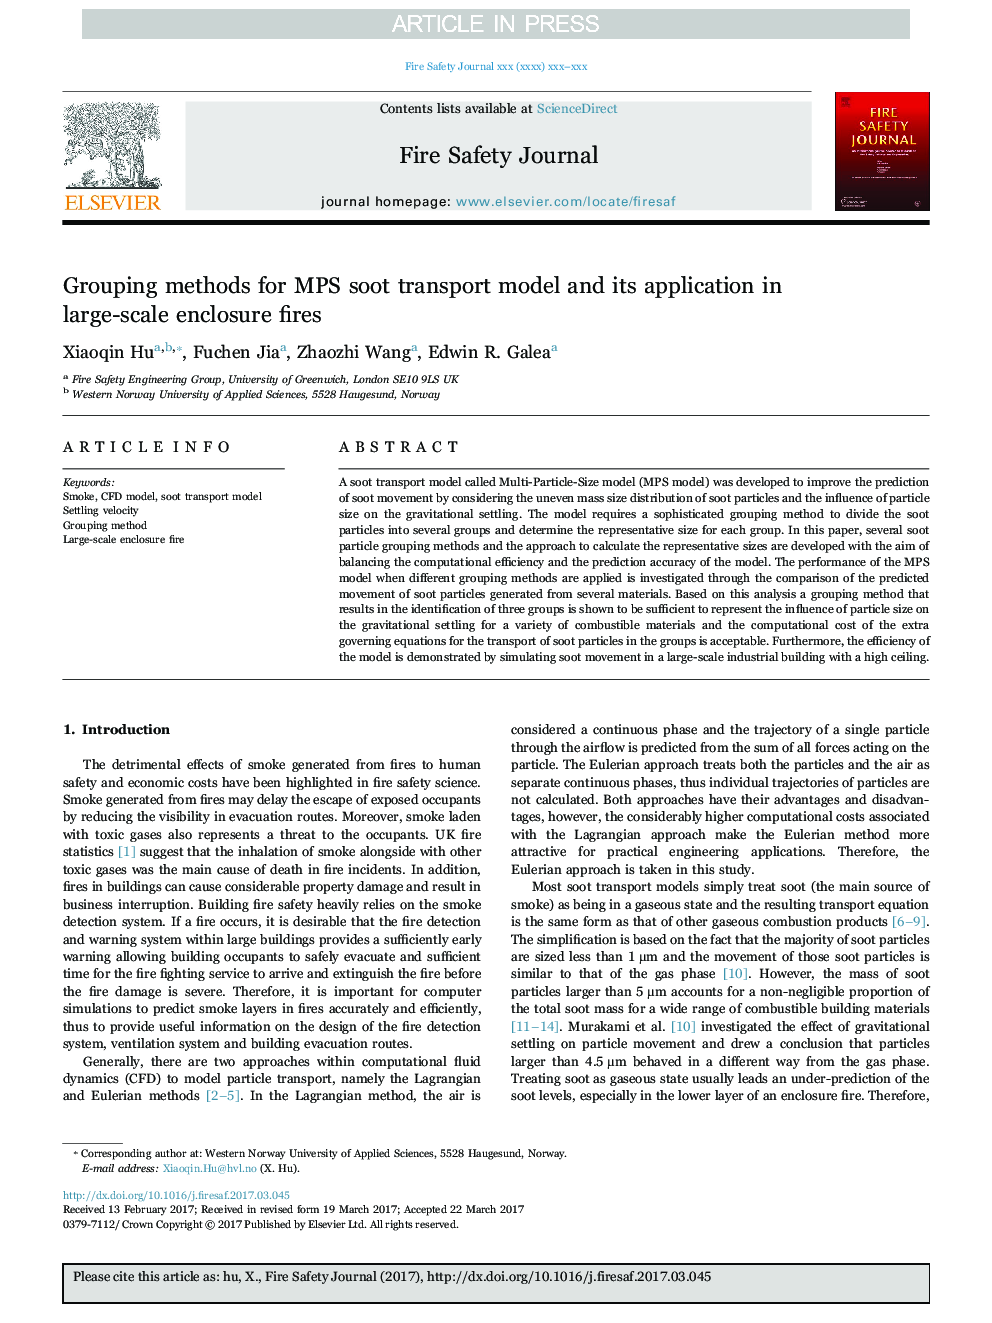 Grouping methods for MPS soot transport model and its application in large-scale enclosure fires